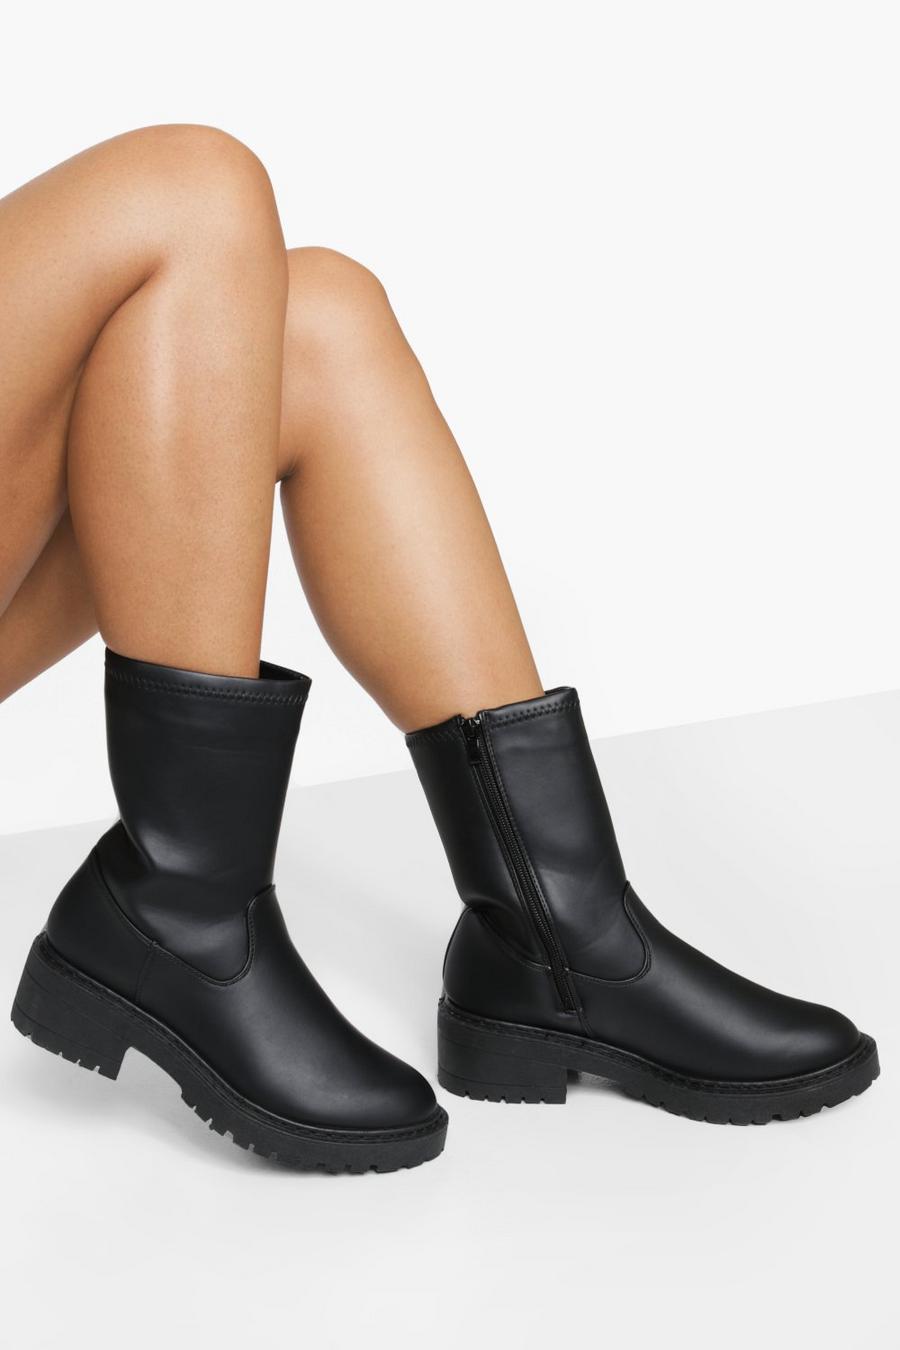 Black nero Wide Fit Chunky Calf High Boots